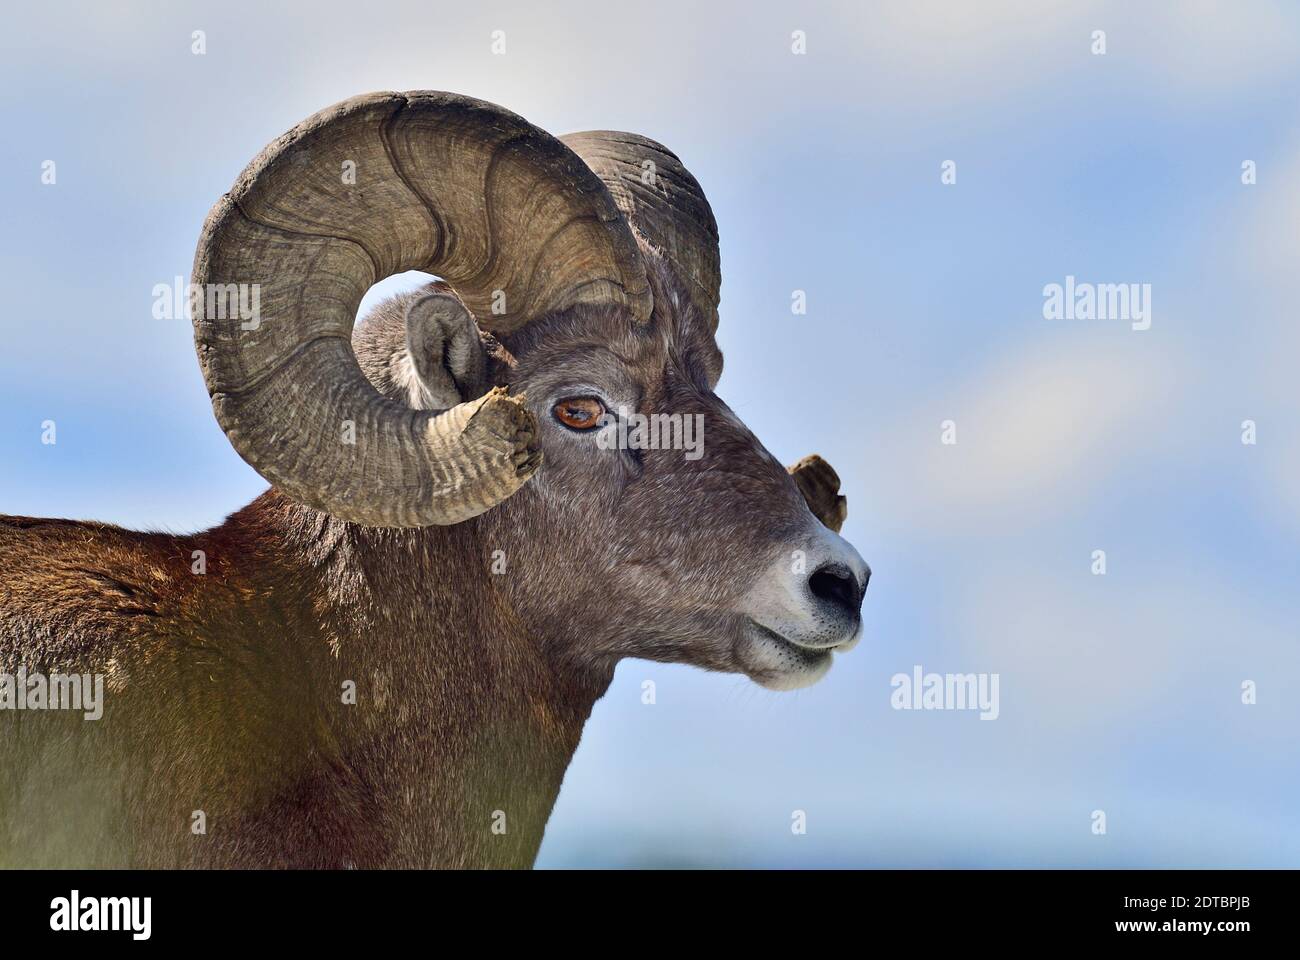 A portrait of an adult male rocky mountain bighorn sheep :Ovis canadensis', in rural Alberta Canada Stock Photo